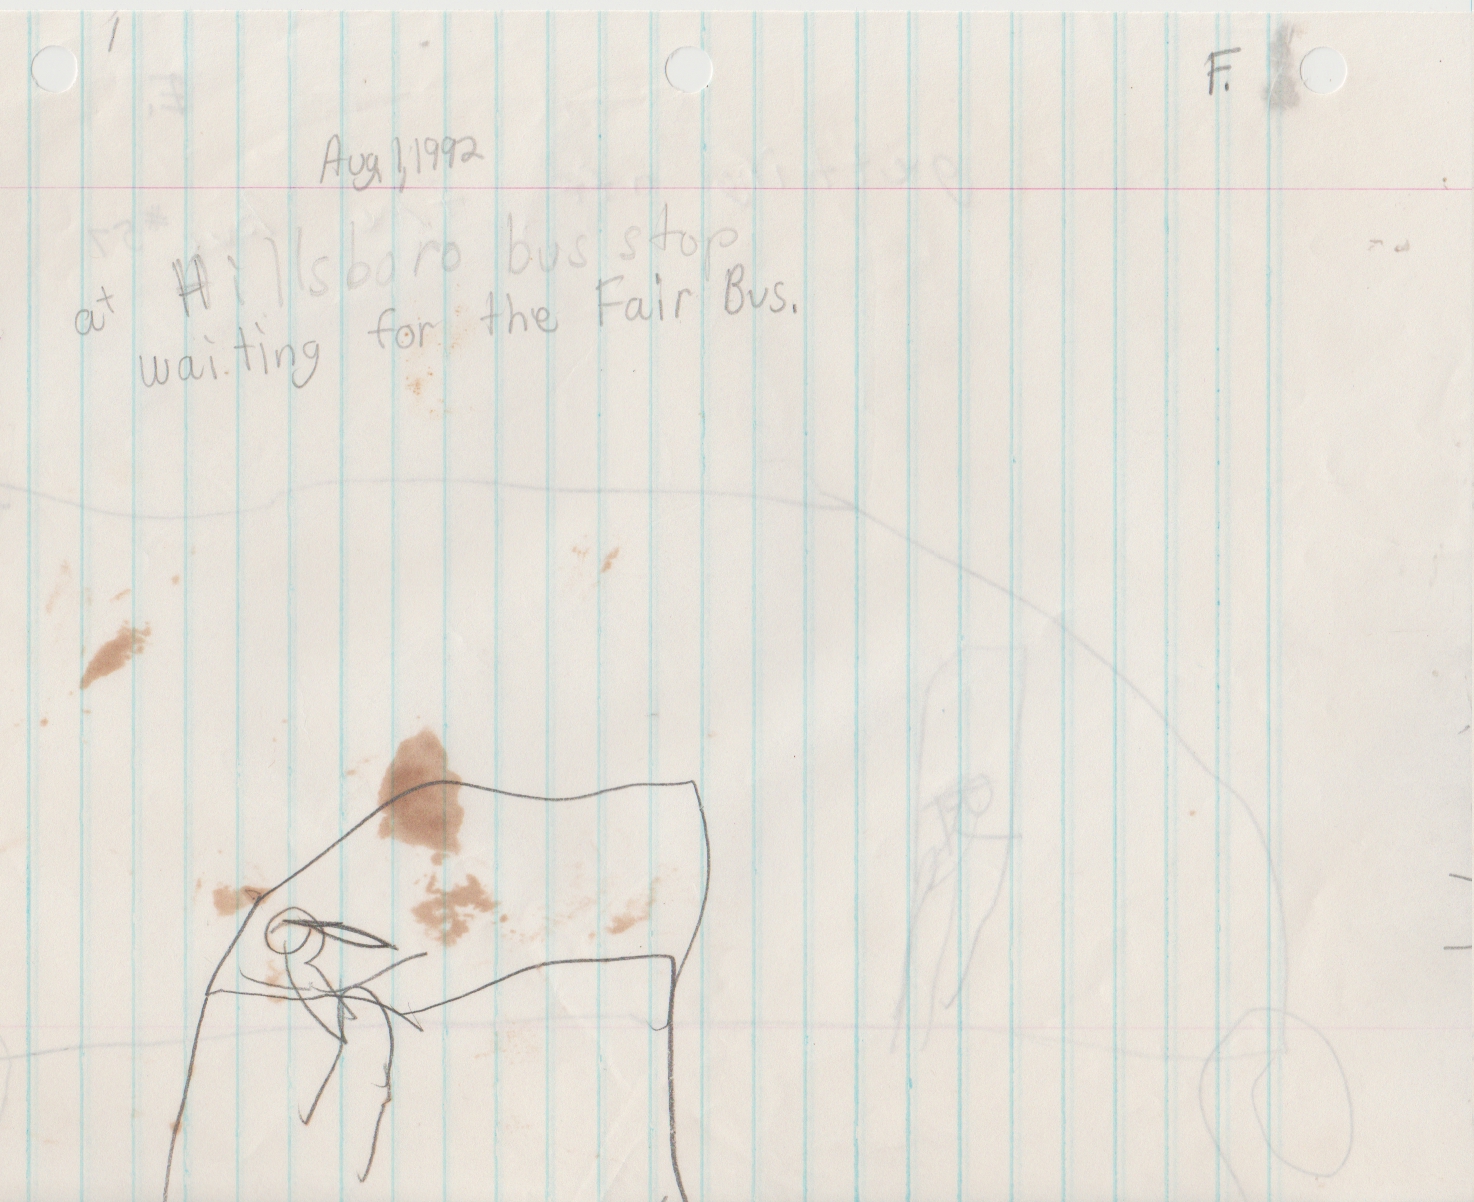 1992-08-01 - Saturday - Fair - Seven-year-old Joey's diary - Indians, Pirates, petting zoo - Hillsboro, OR-08.jpg